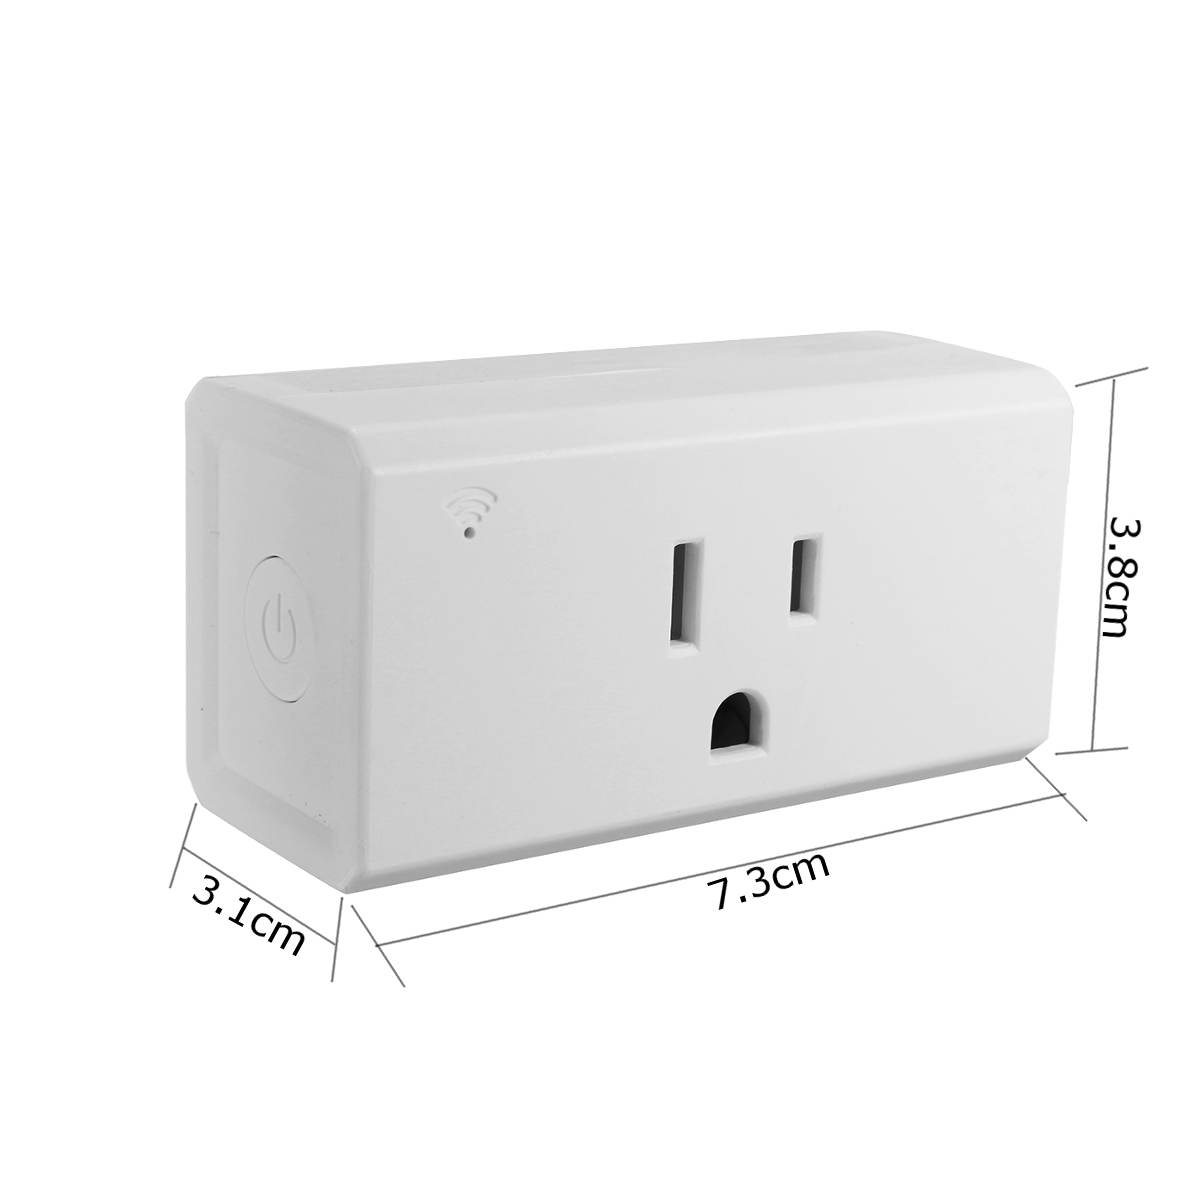 Excellwayreg-Wifi-Smart-Plug-Smart-Socket-Outlet-Compatible-with-Alexa-and-Google-Home-Voice-Control-1258076-10